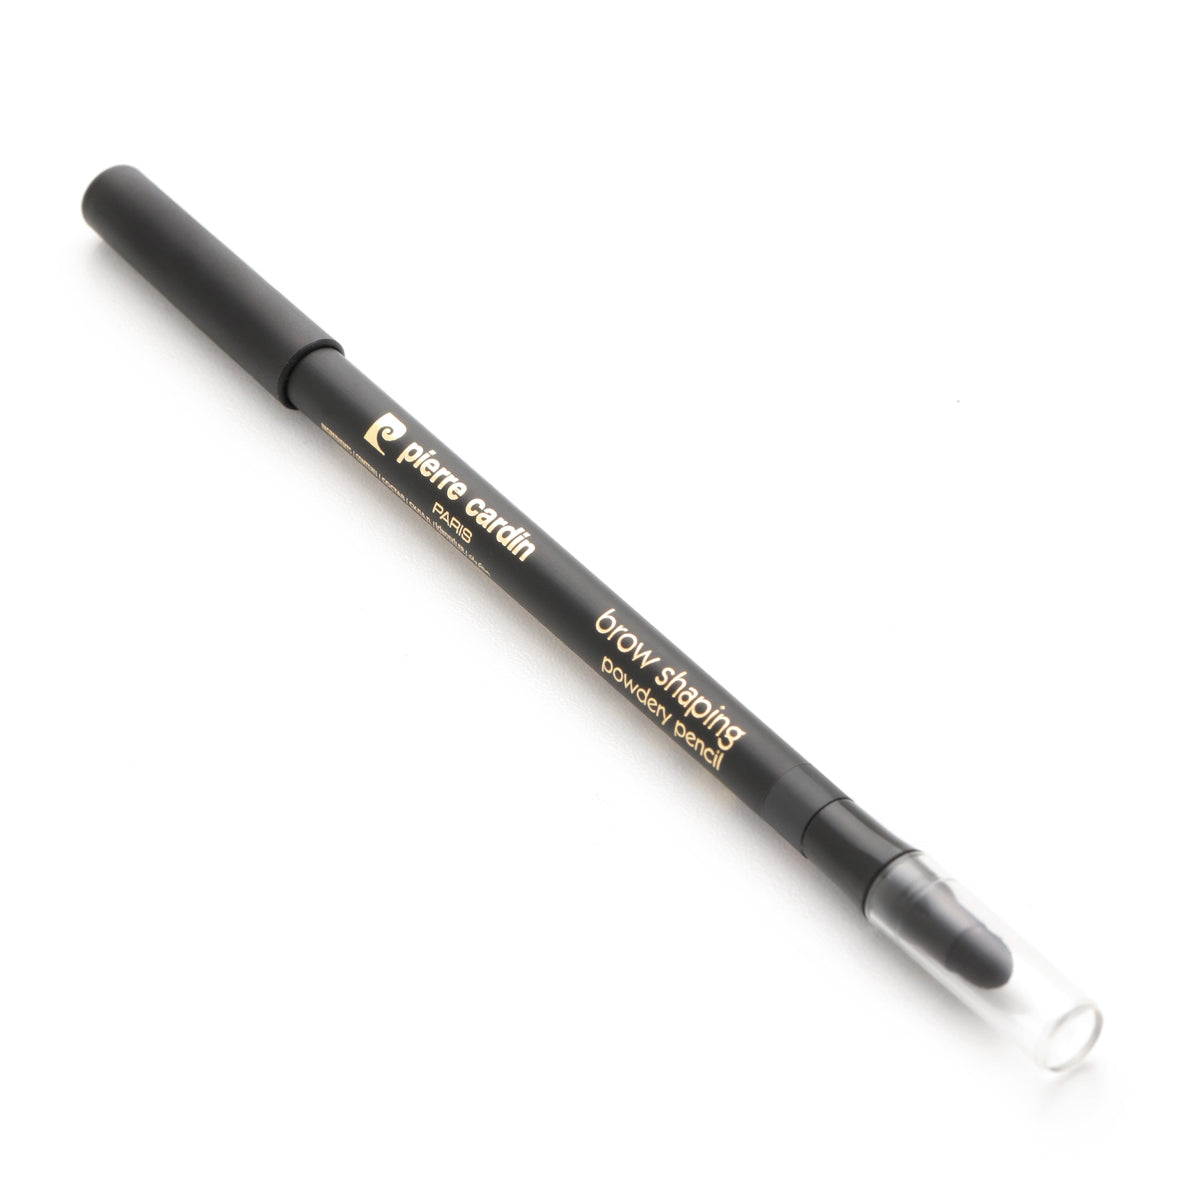 Pierre Cardin Brow Shaping Powdery Pencil  Cool Soft Black to Grey